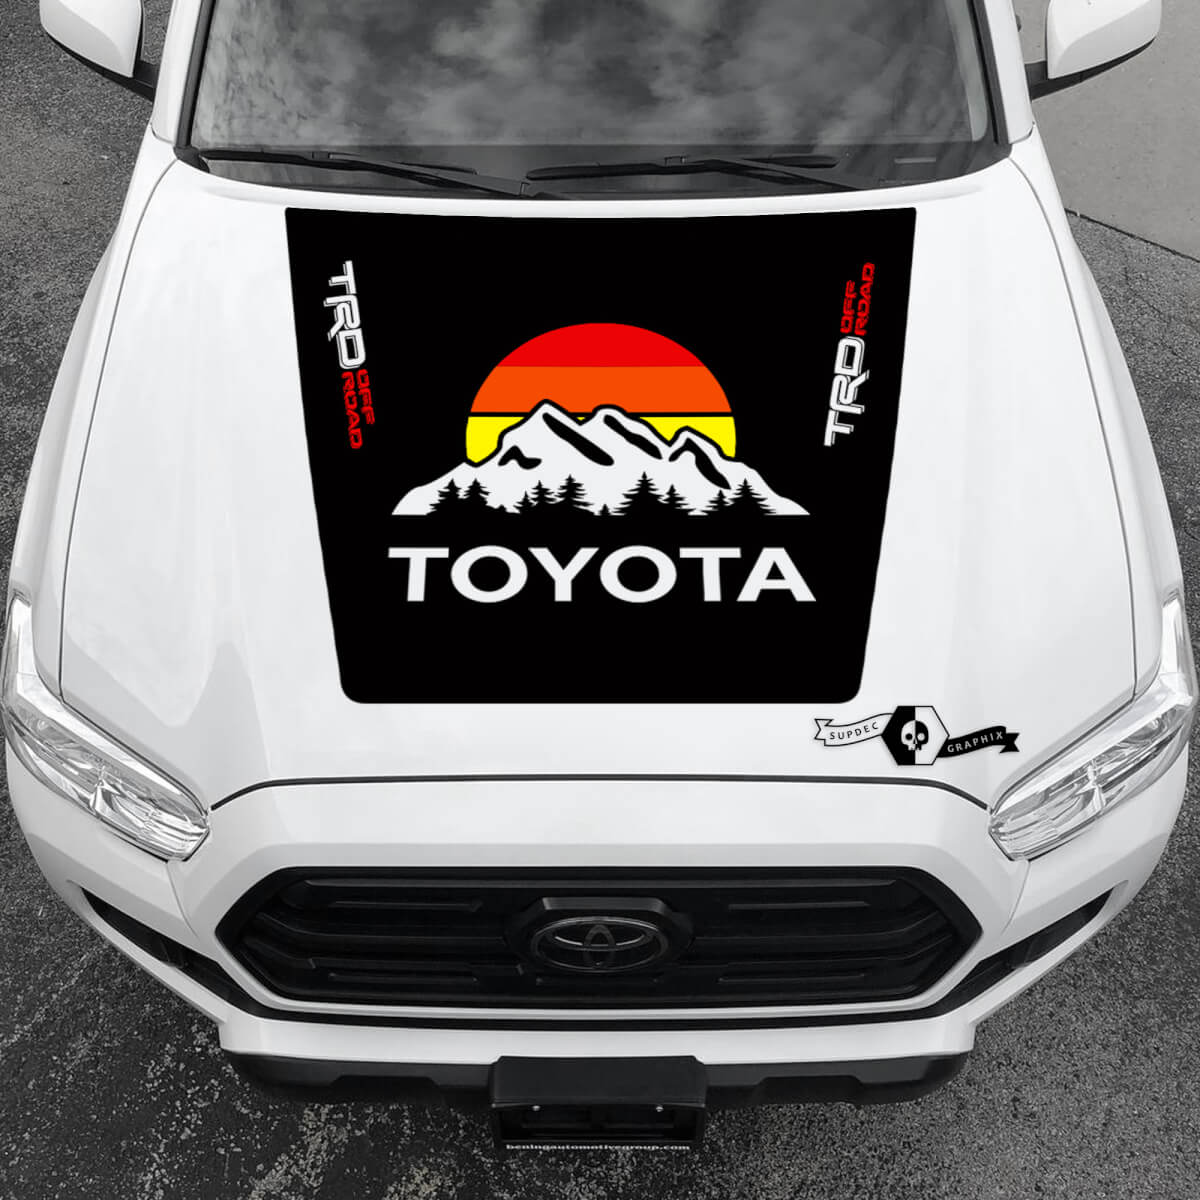 Tacoma TRD Sunrise Vintage TOYOTA Mountain Forest Off Road Hood Decals Stickers for Tacoma Tundra 4Runner Hilux